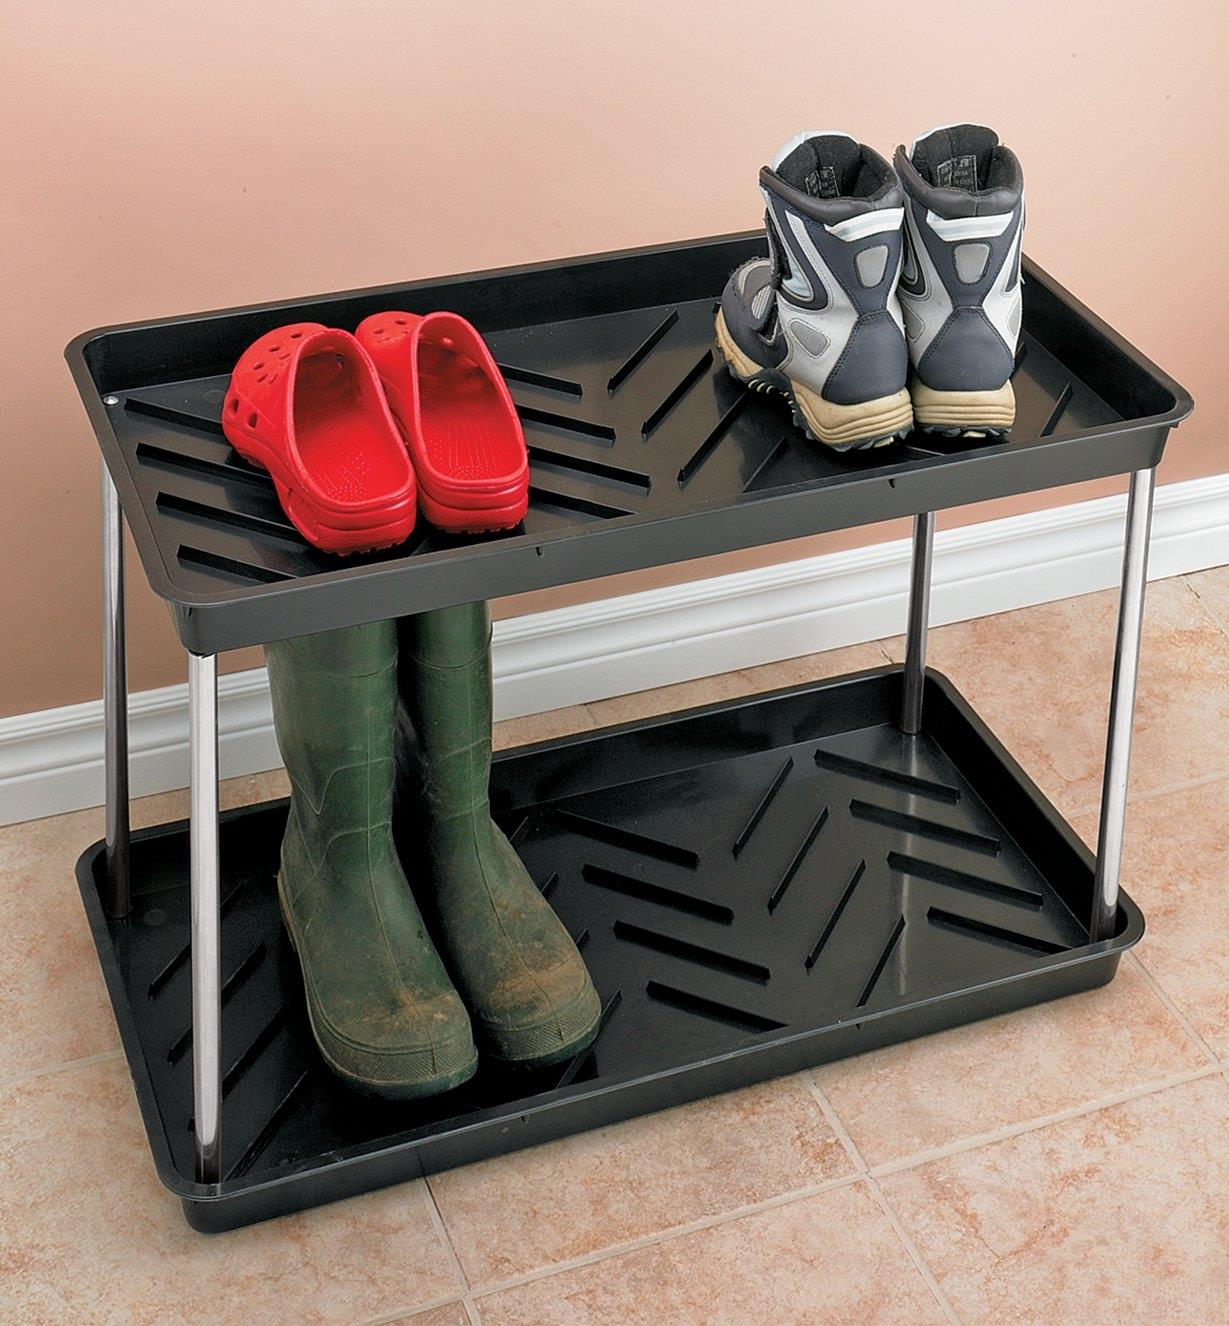 Three pairs of shoes and boots on the Two-Tier Boot Tray